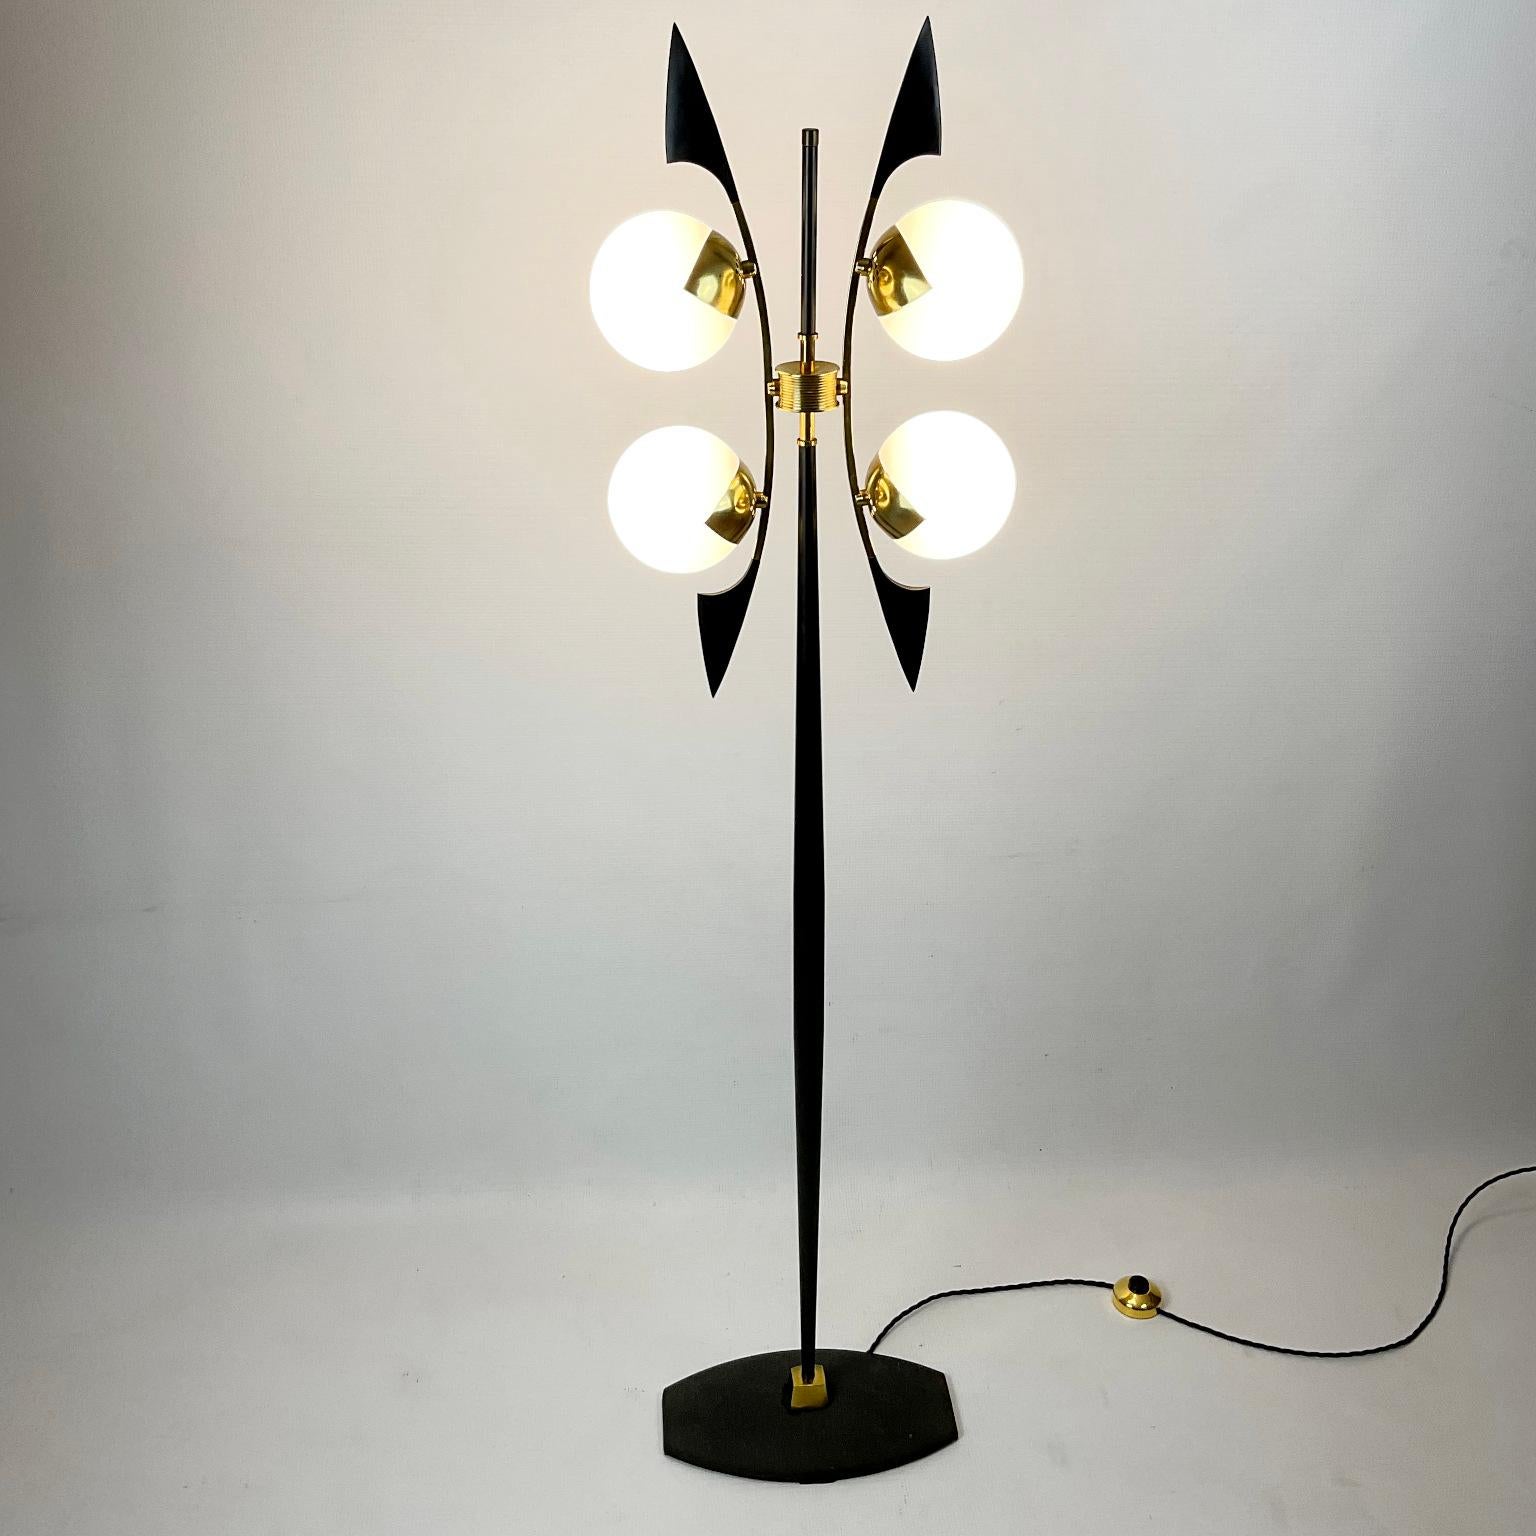 Mid-Century Modern 1950s Floor Lamp Edited by Maison Arlus with Four Globes and Brass Saber Finish For Sale